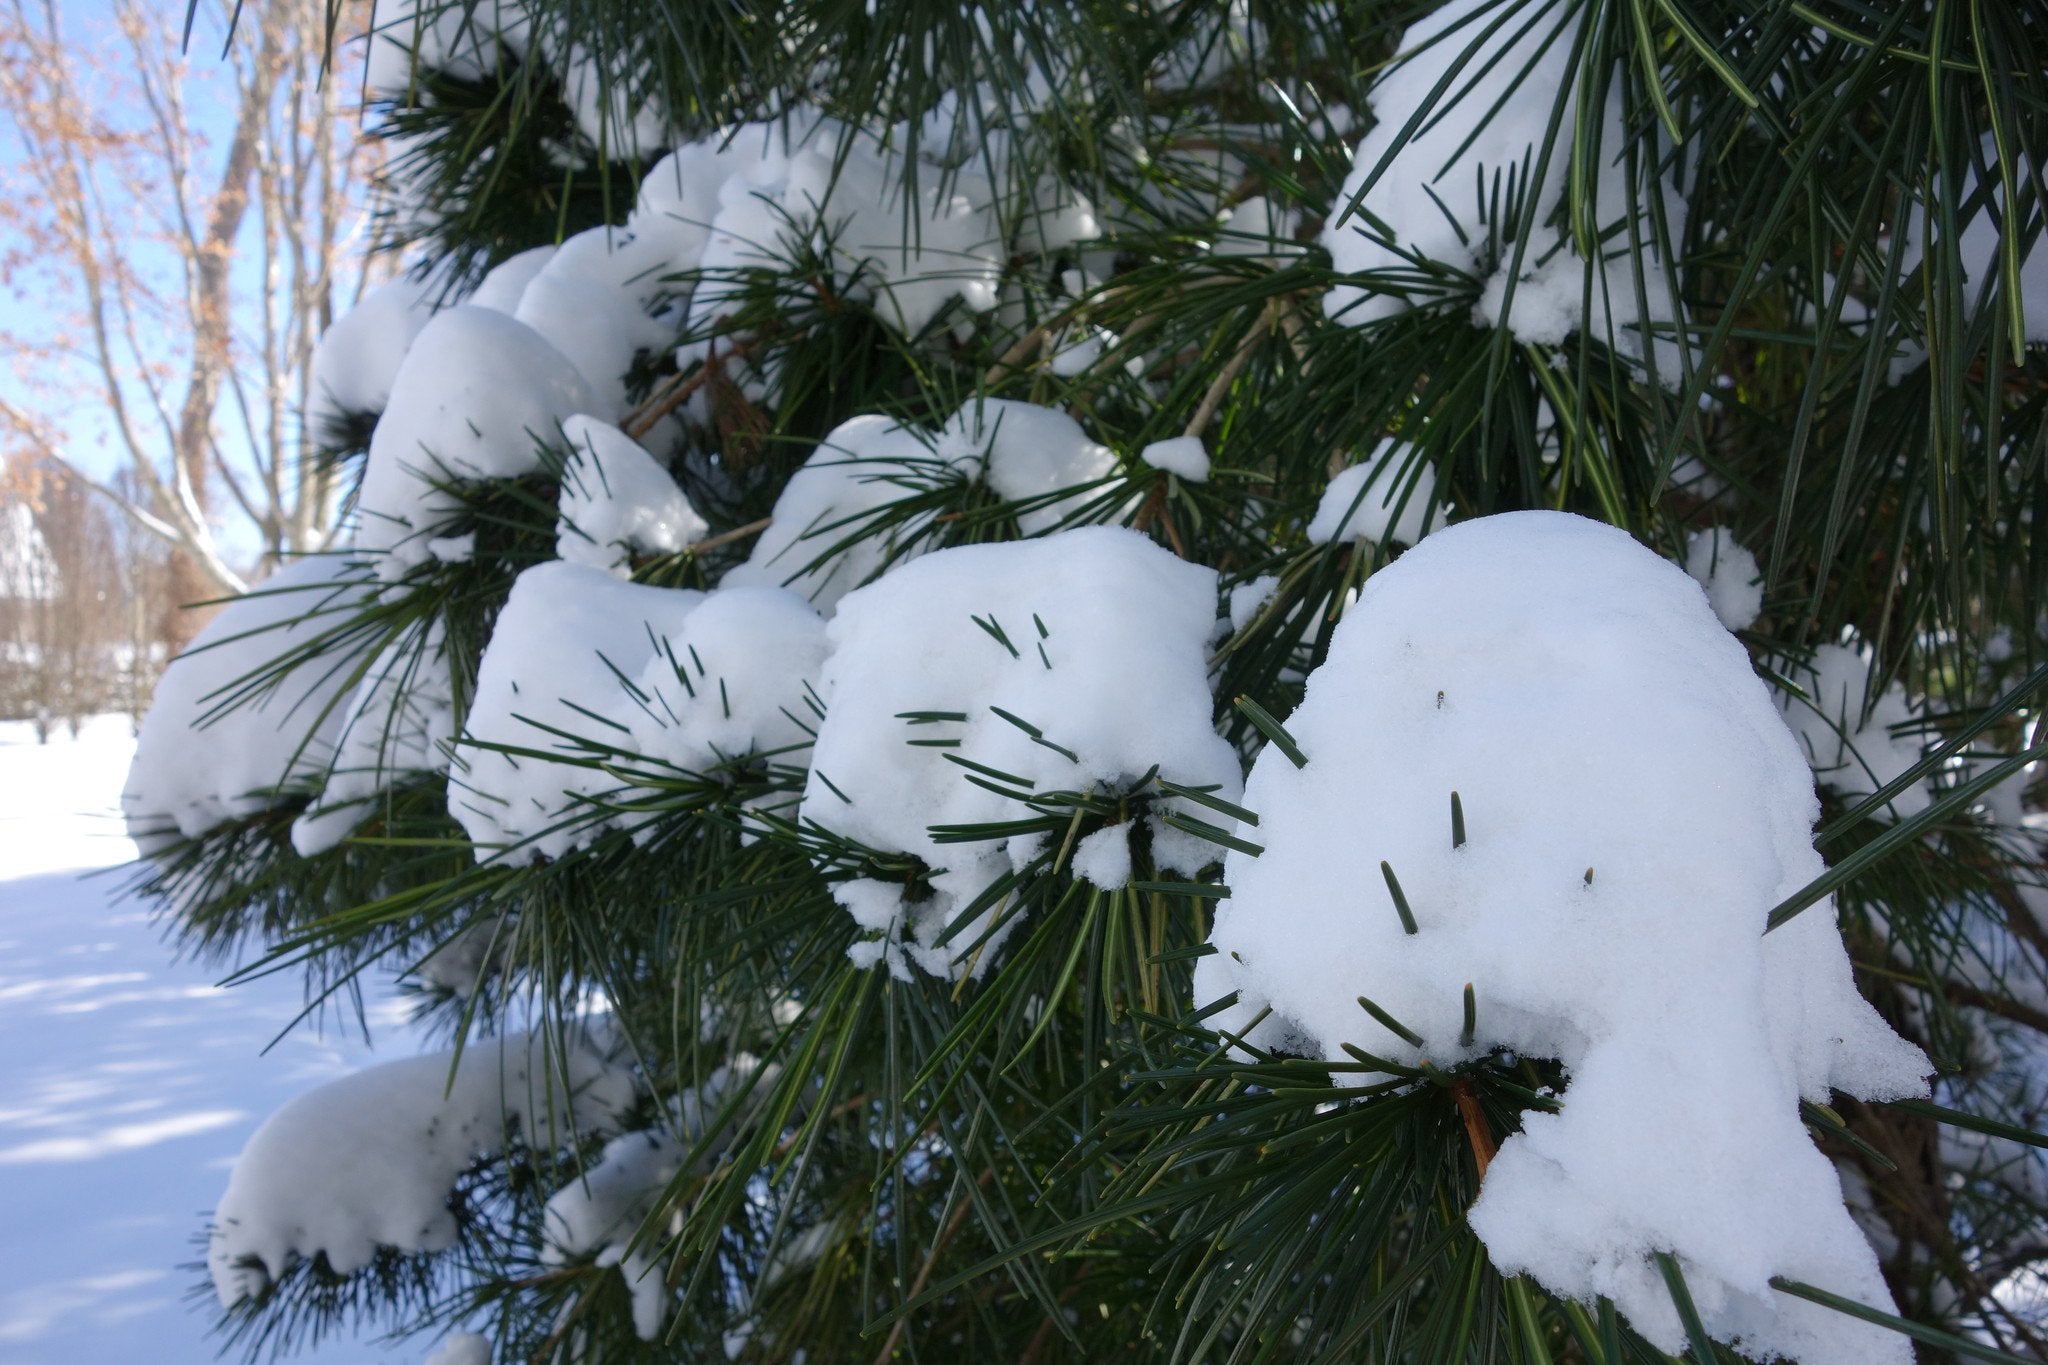 From Cryptomeria to Specimen Spruces: A Winter Walk at LongHouse